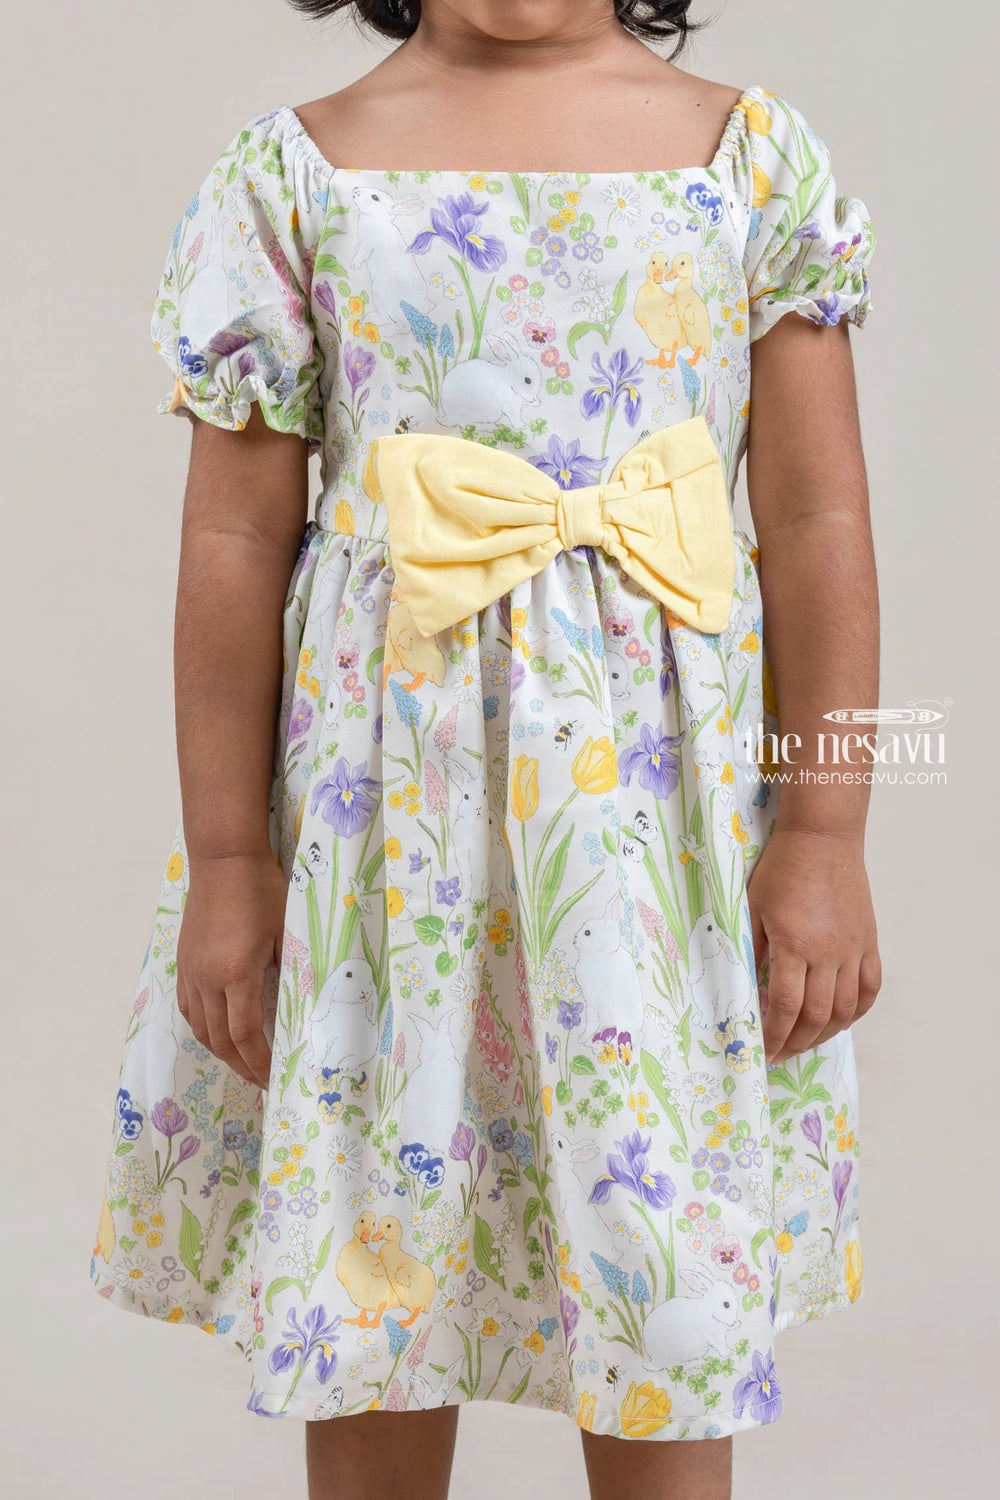 The Nesavu Girls Fancy Frock Cute Animals N Floral Printed White Girls Cotton Frock With Bow Applique Nesavu Latest Frock Design Online | Animal Printed Frock | The Nesavu